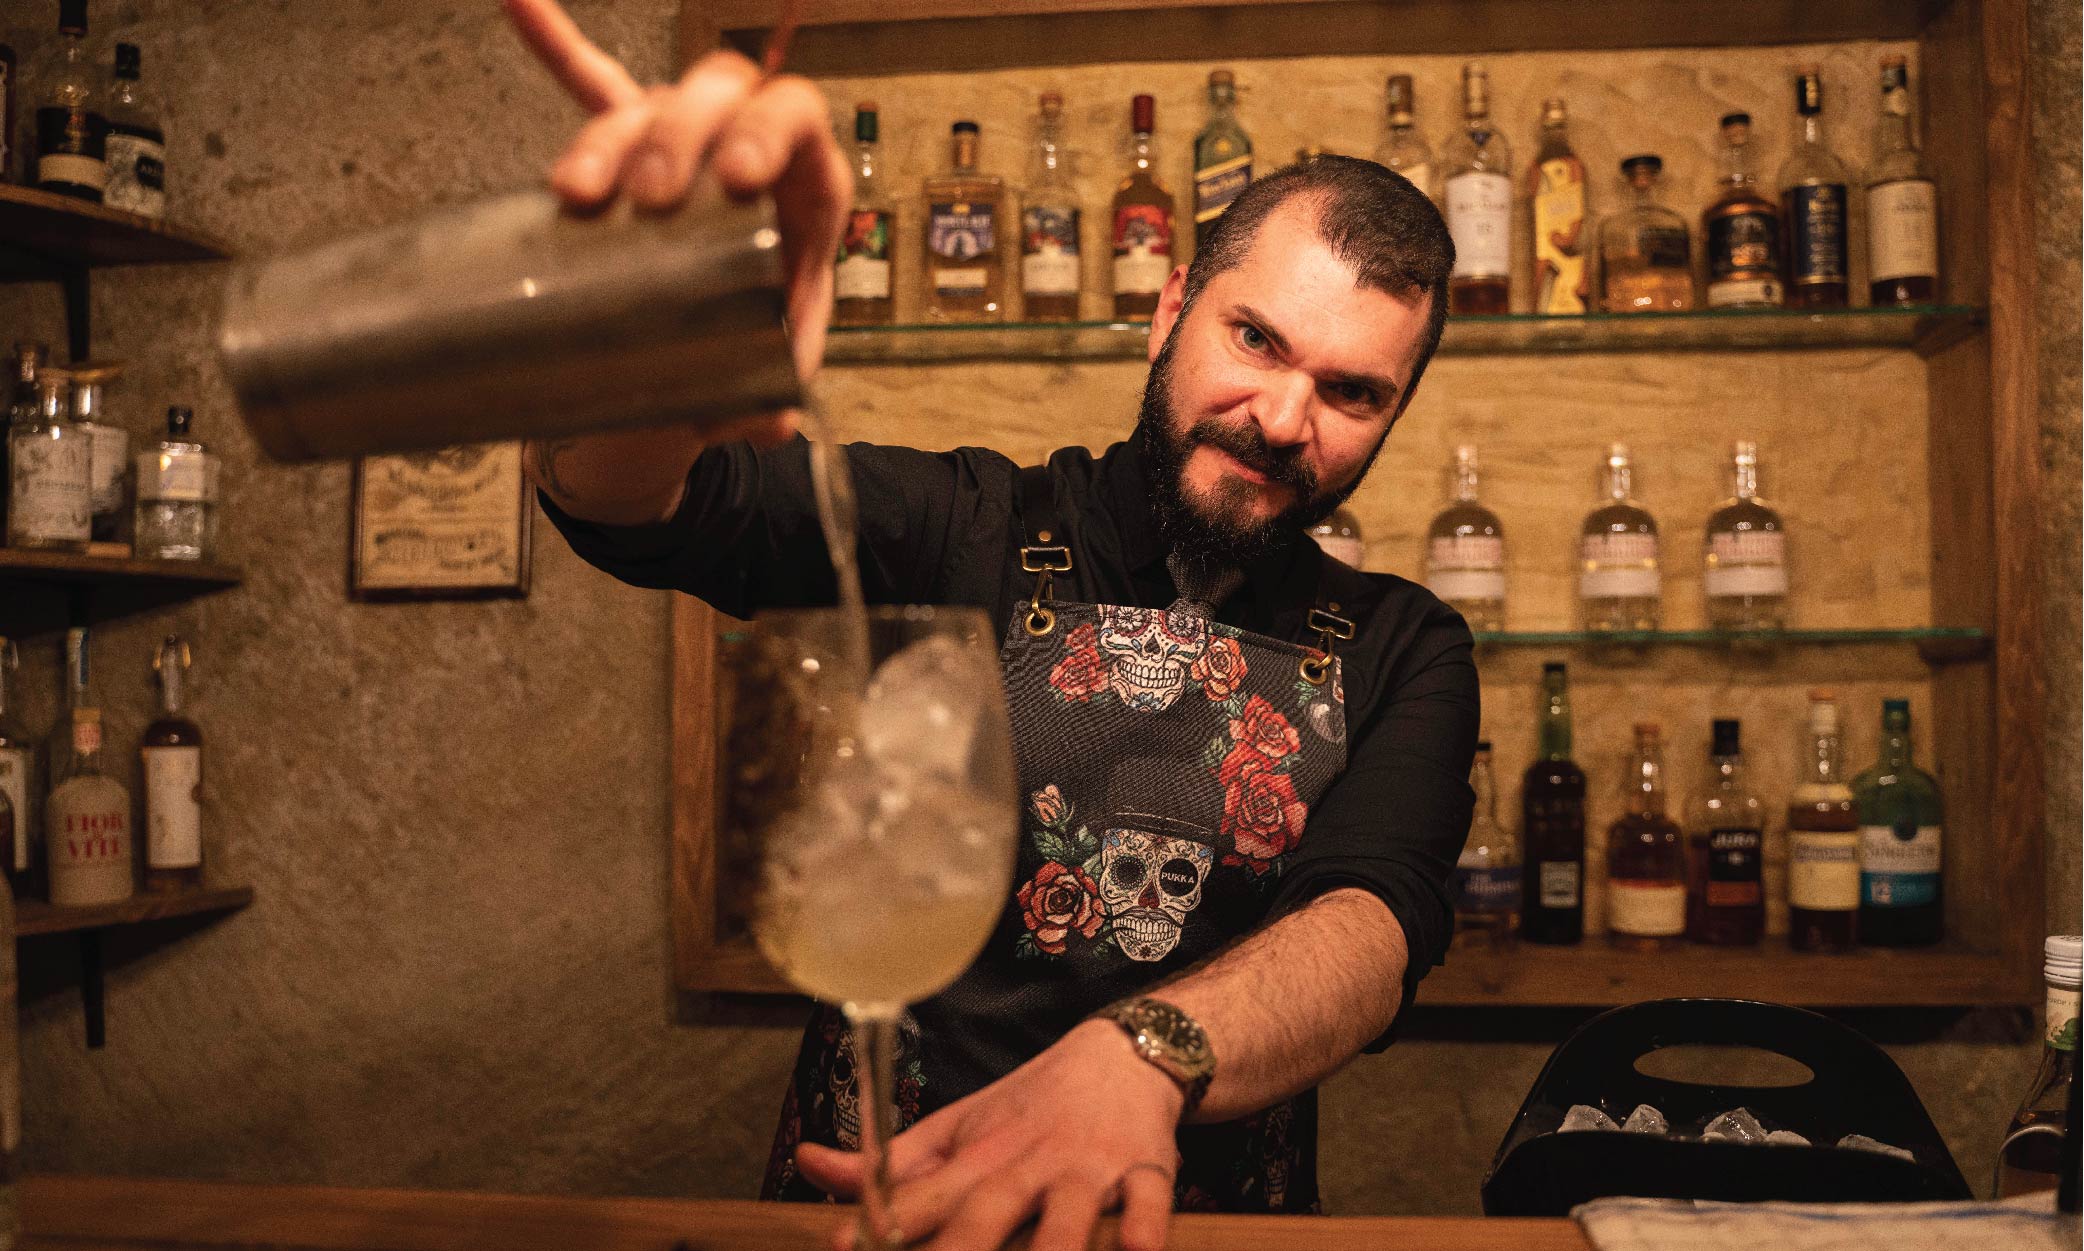 4-time national cocktail competition winner and world cocktail champion, Panos, at The Still, Balzan.